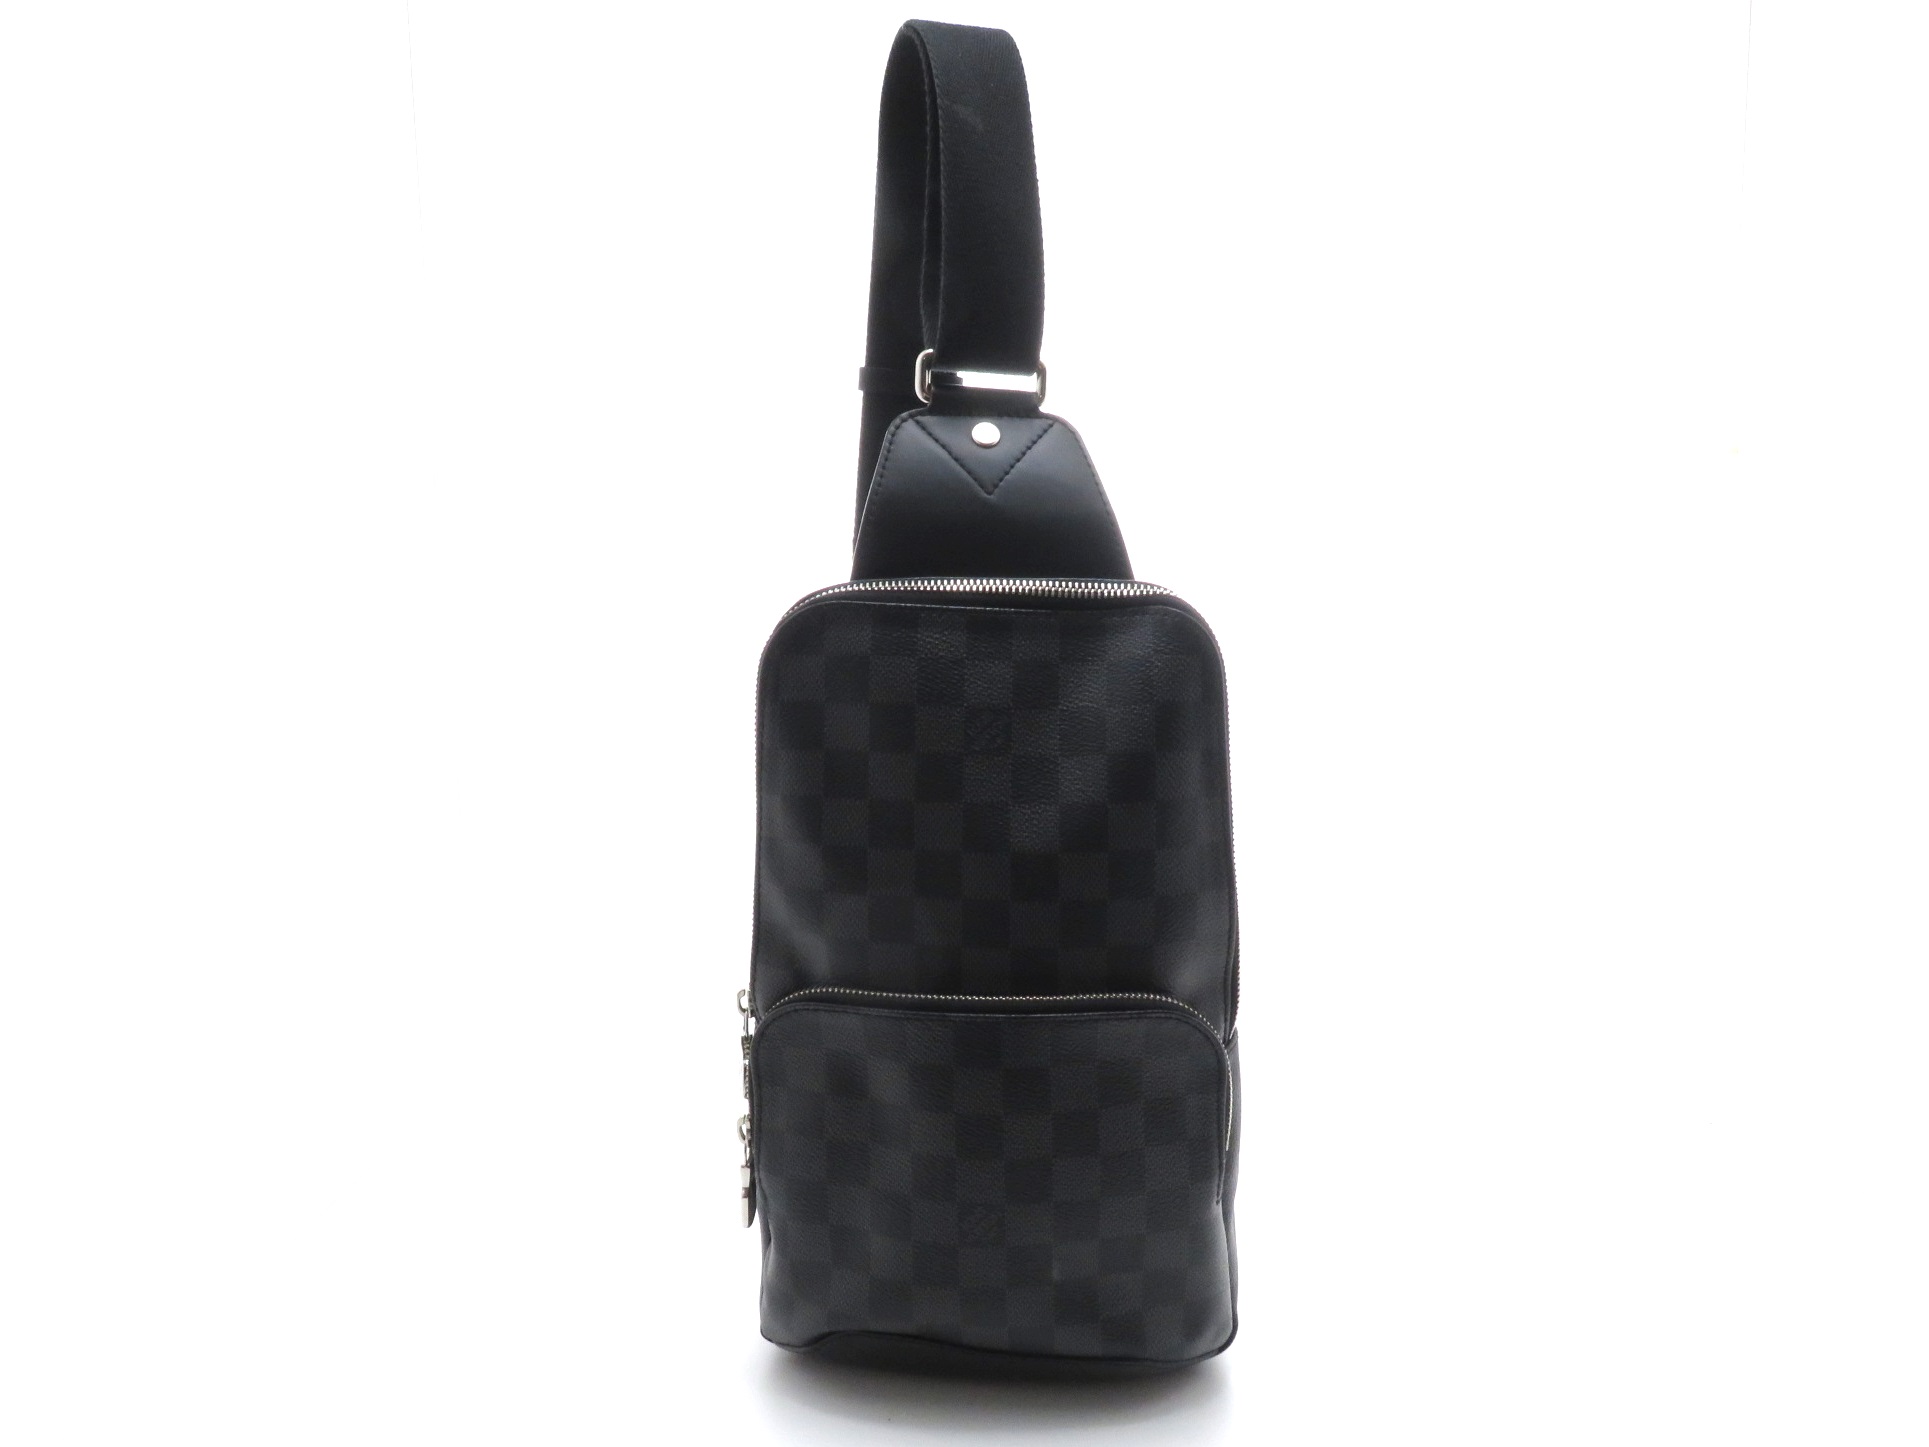 LOUIS VUITTON　ルイヴィトン　アヴェニュー・スリングバッグ　ボディバッグ　ダミエ・グラフィット　N41719　【472】